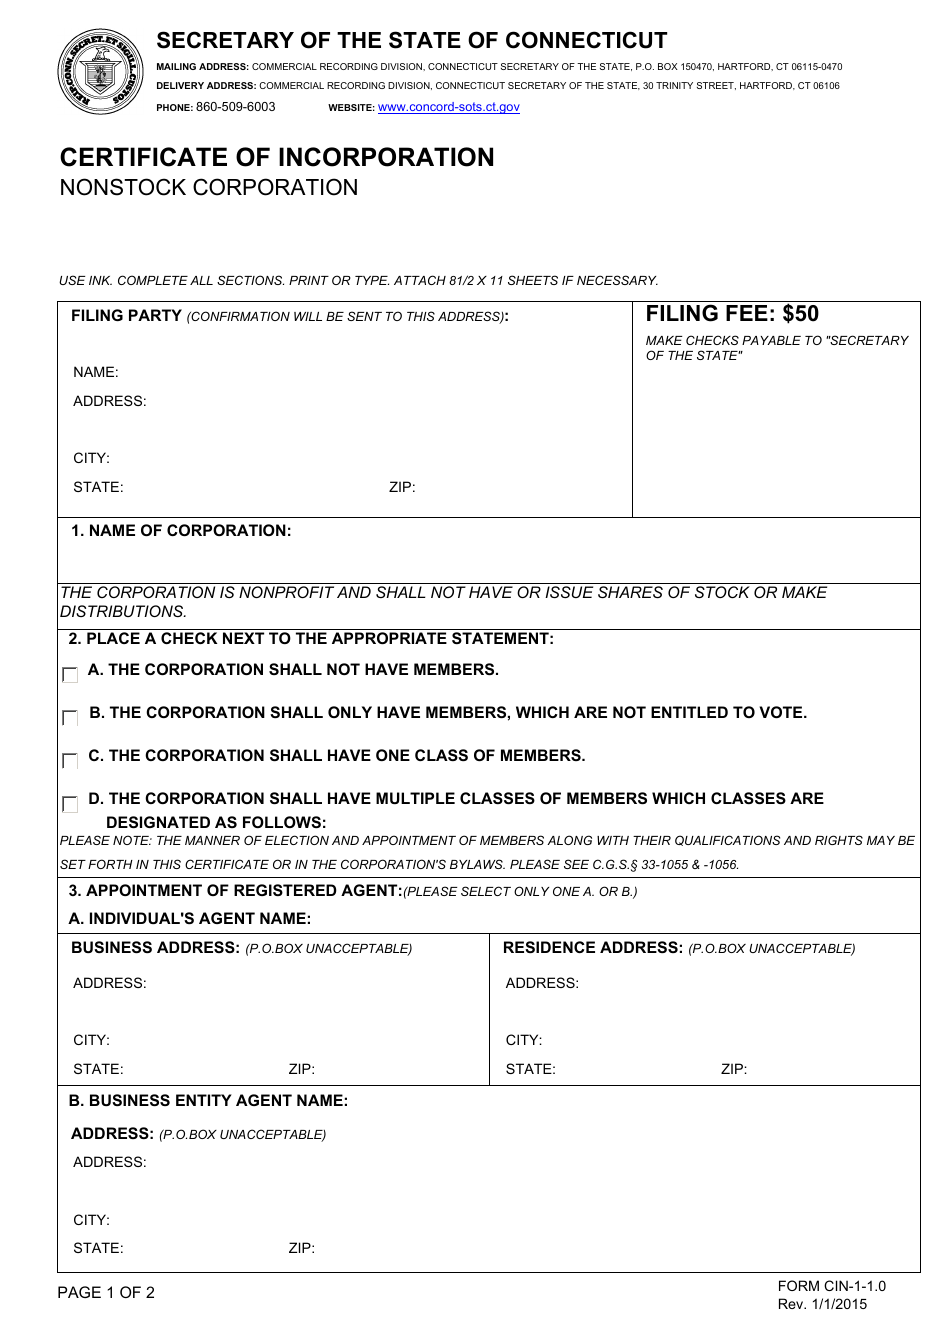 Form CIN-1-1.0 Certificate of Incorporation - Nonstock Corporation - Connecticut, Page 1